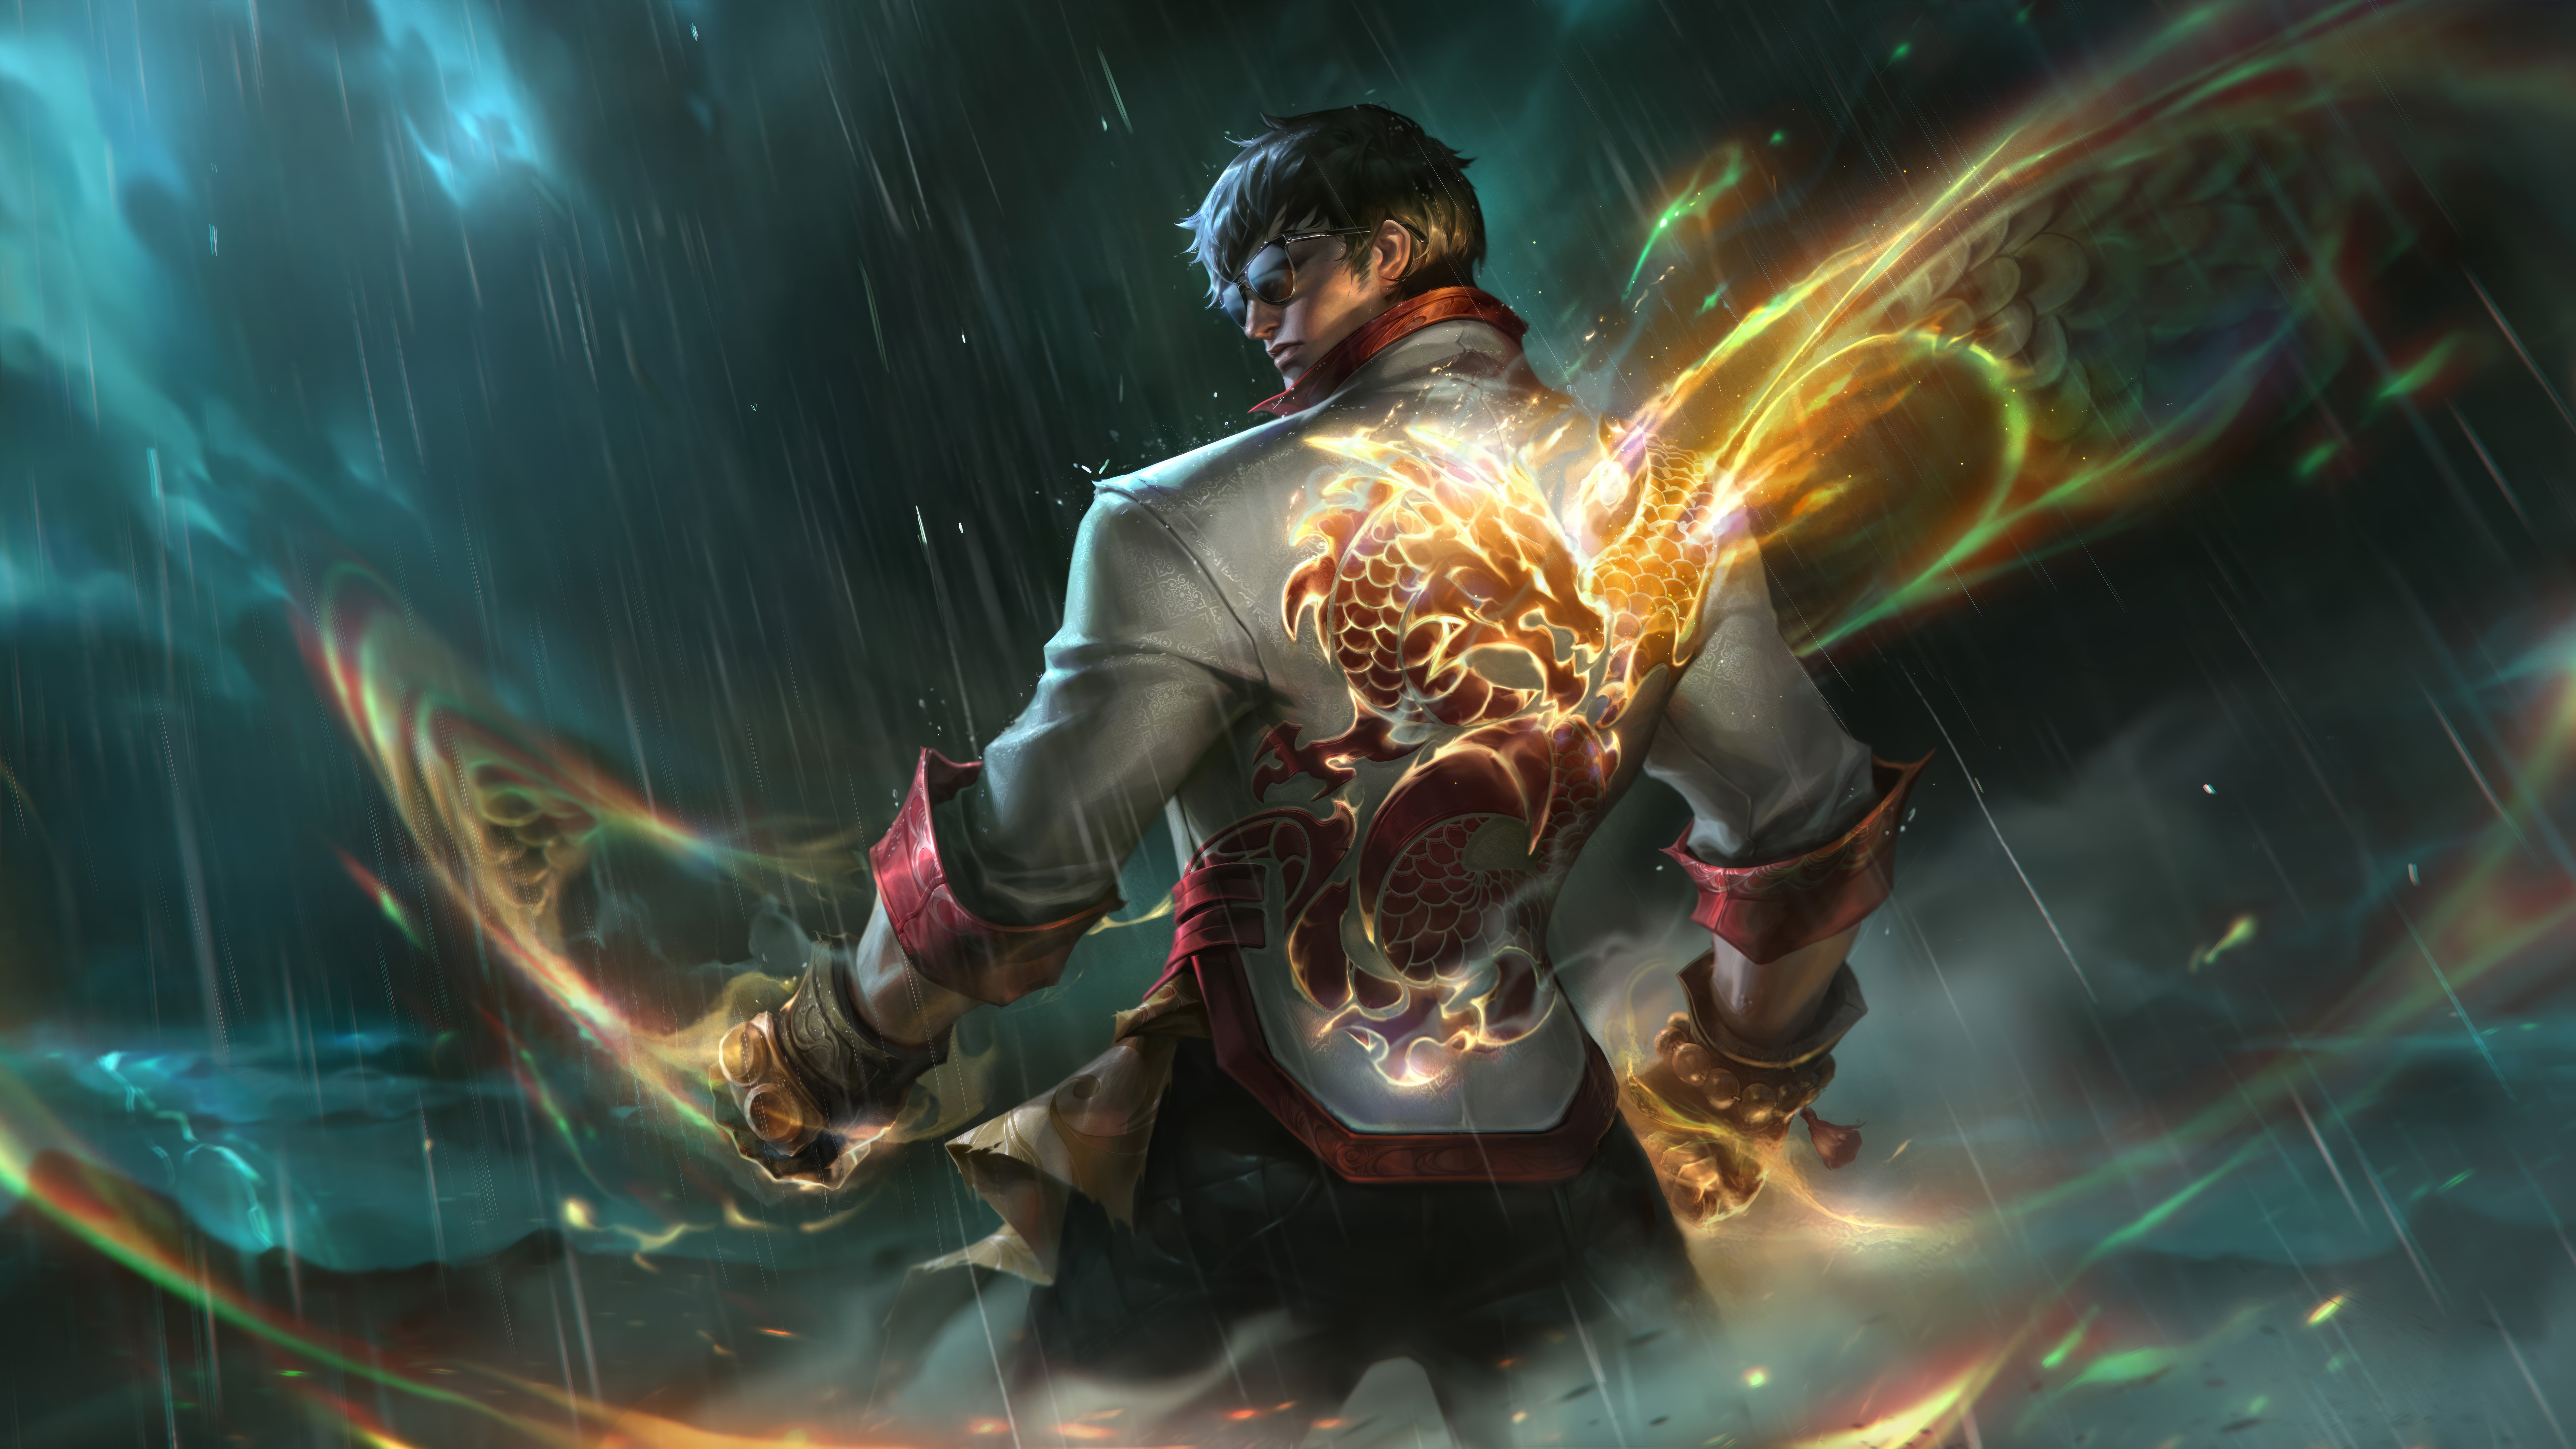 General 7680x4320 Lee Sin (League of Legends) video games GZG Riot Games digital art League of Legends rain video game characters 4K video game men clouds video game art standing men with shades water sunglasses short hair closed mouth tassels rolled sleeves fist